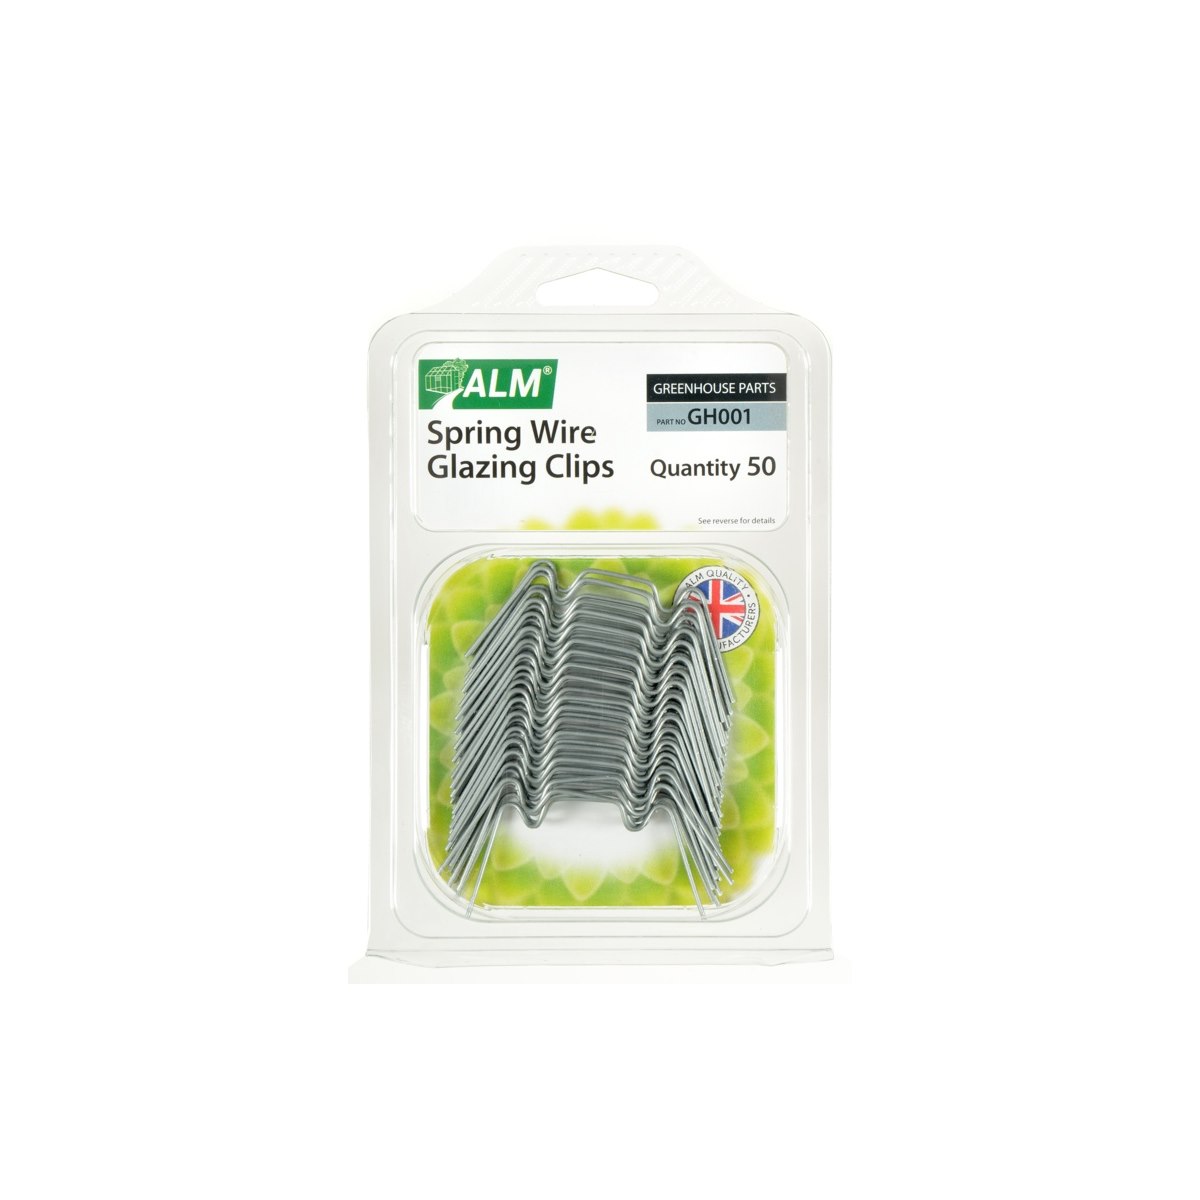 ALM GH001 Spring Wire Glazing Clips 50 Pack